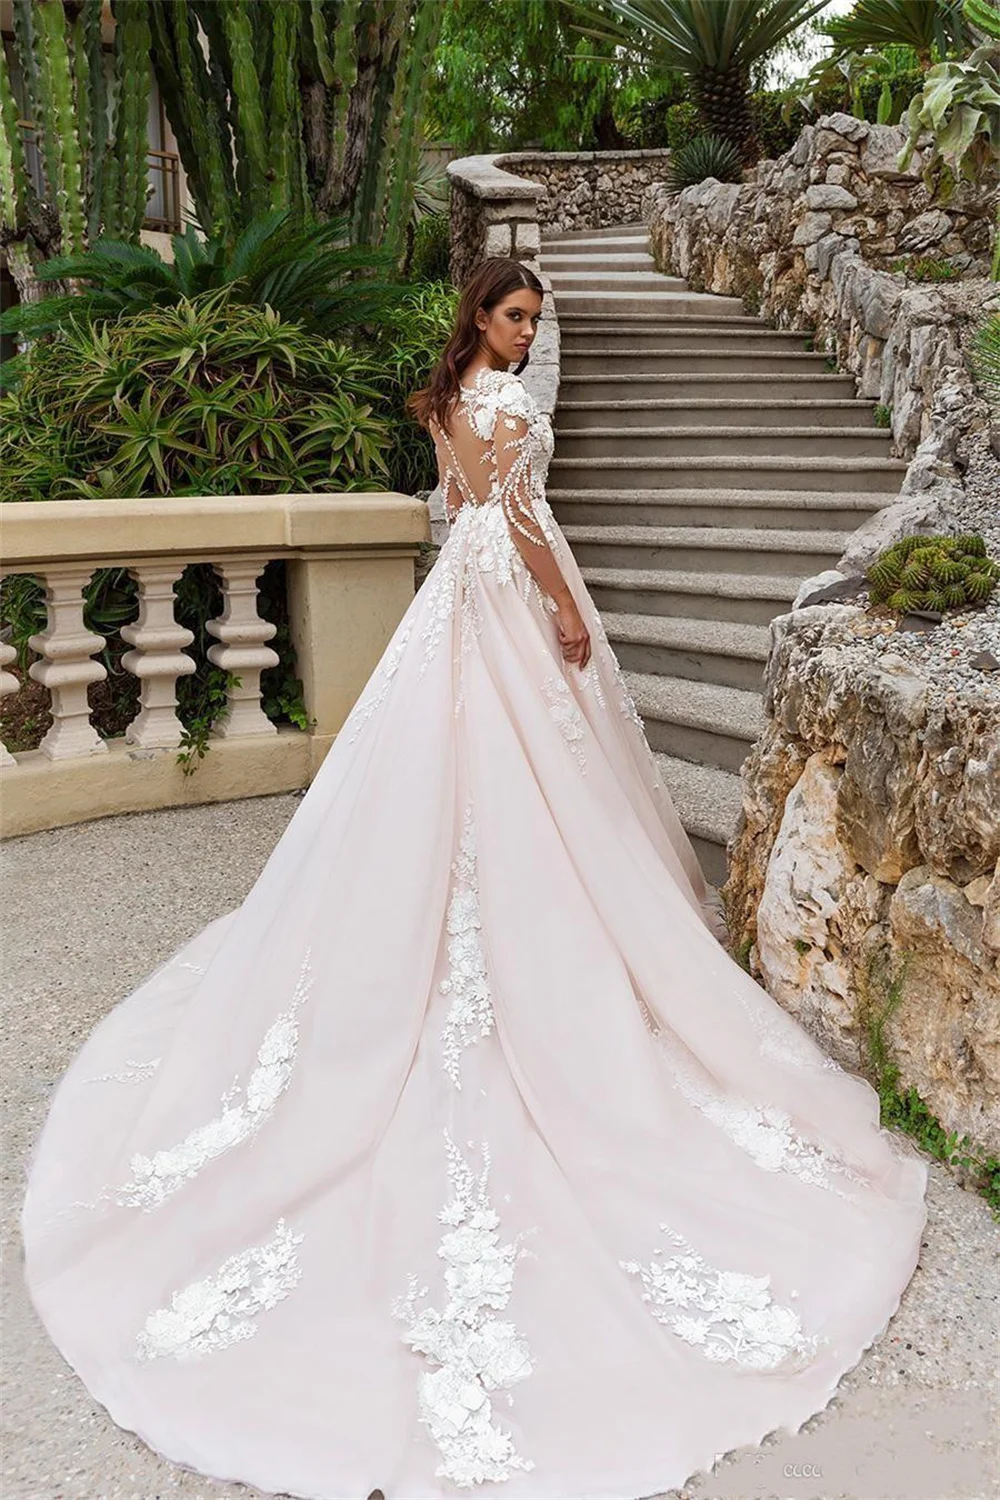 

Wedding Dress Bridal Gowns Sheer Long Sleeves V Neck Embellished Lace Embroidered Romantic Princess Blush A Line Beach